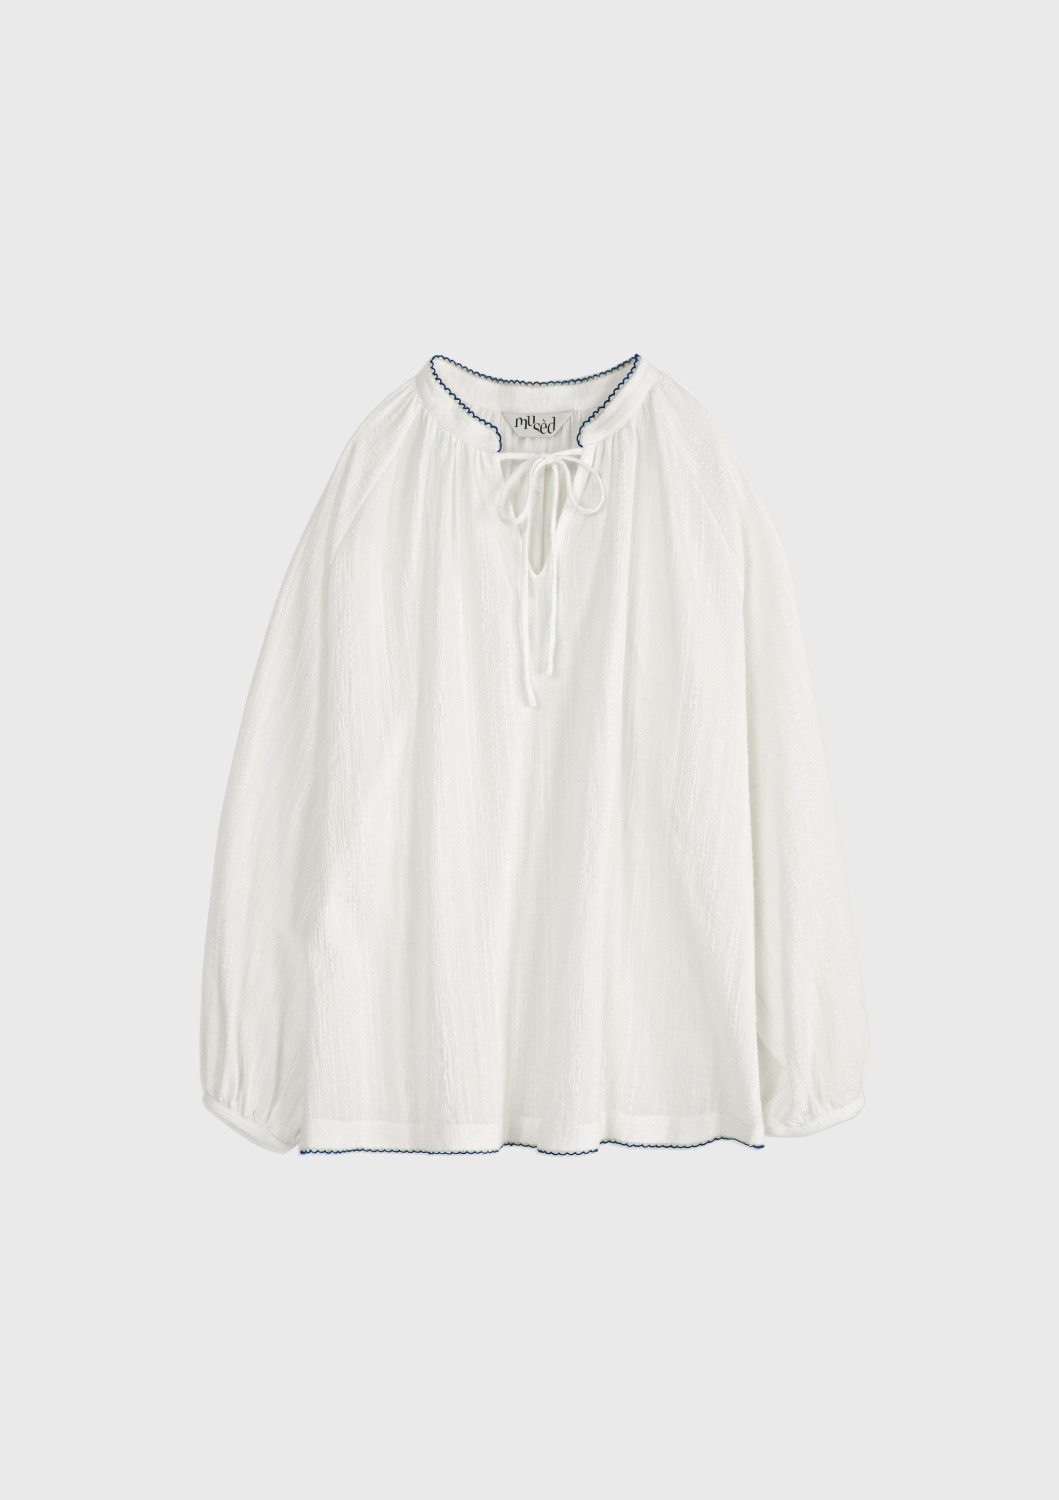 Mused Bloom Blouse - Crispy Cotton White